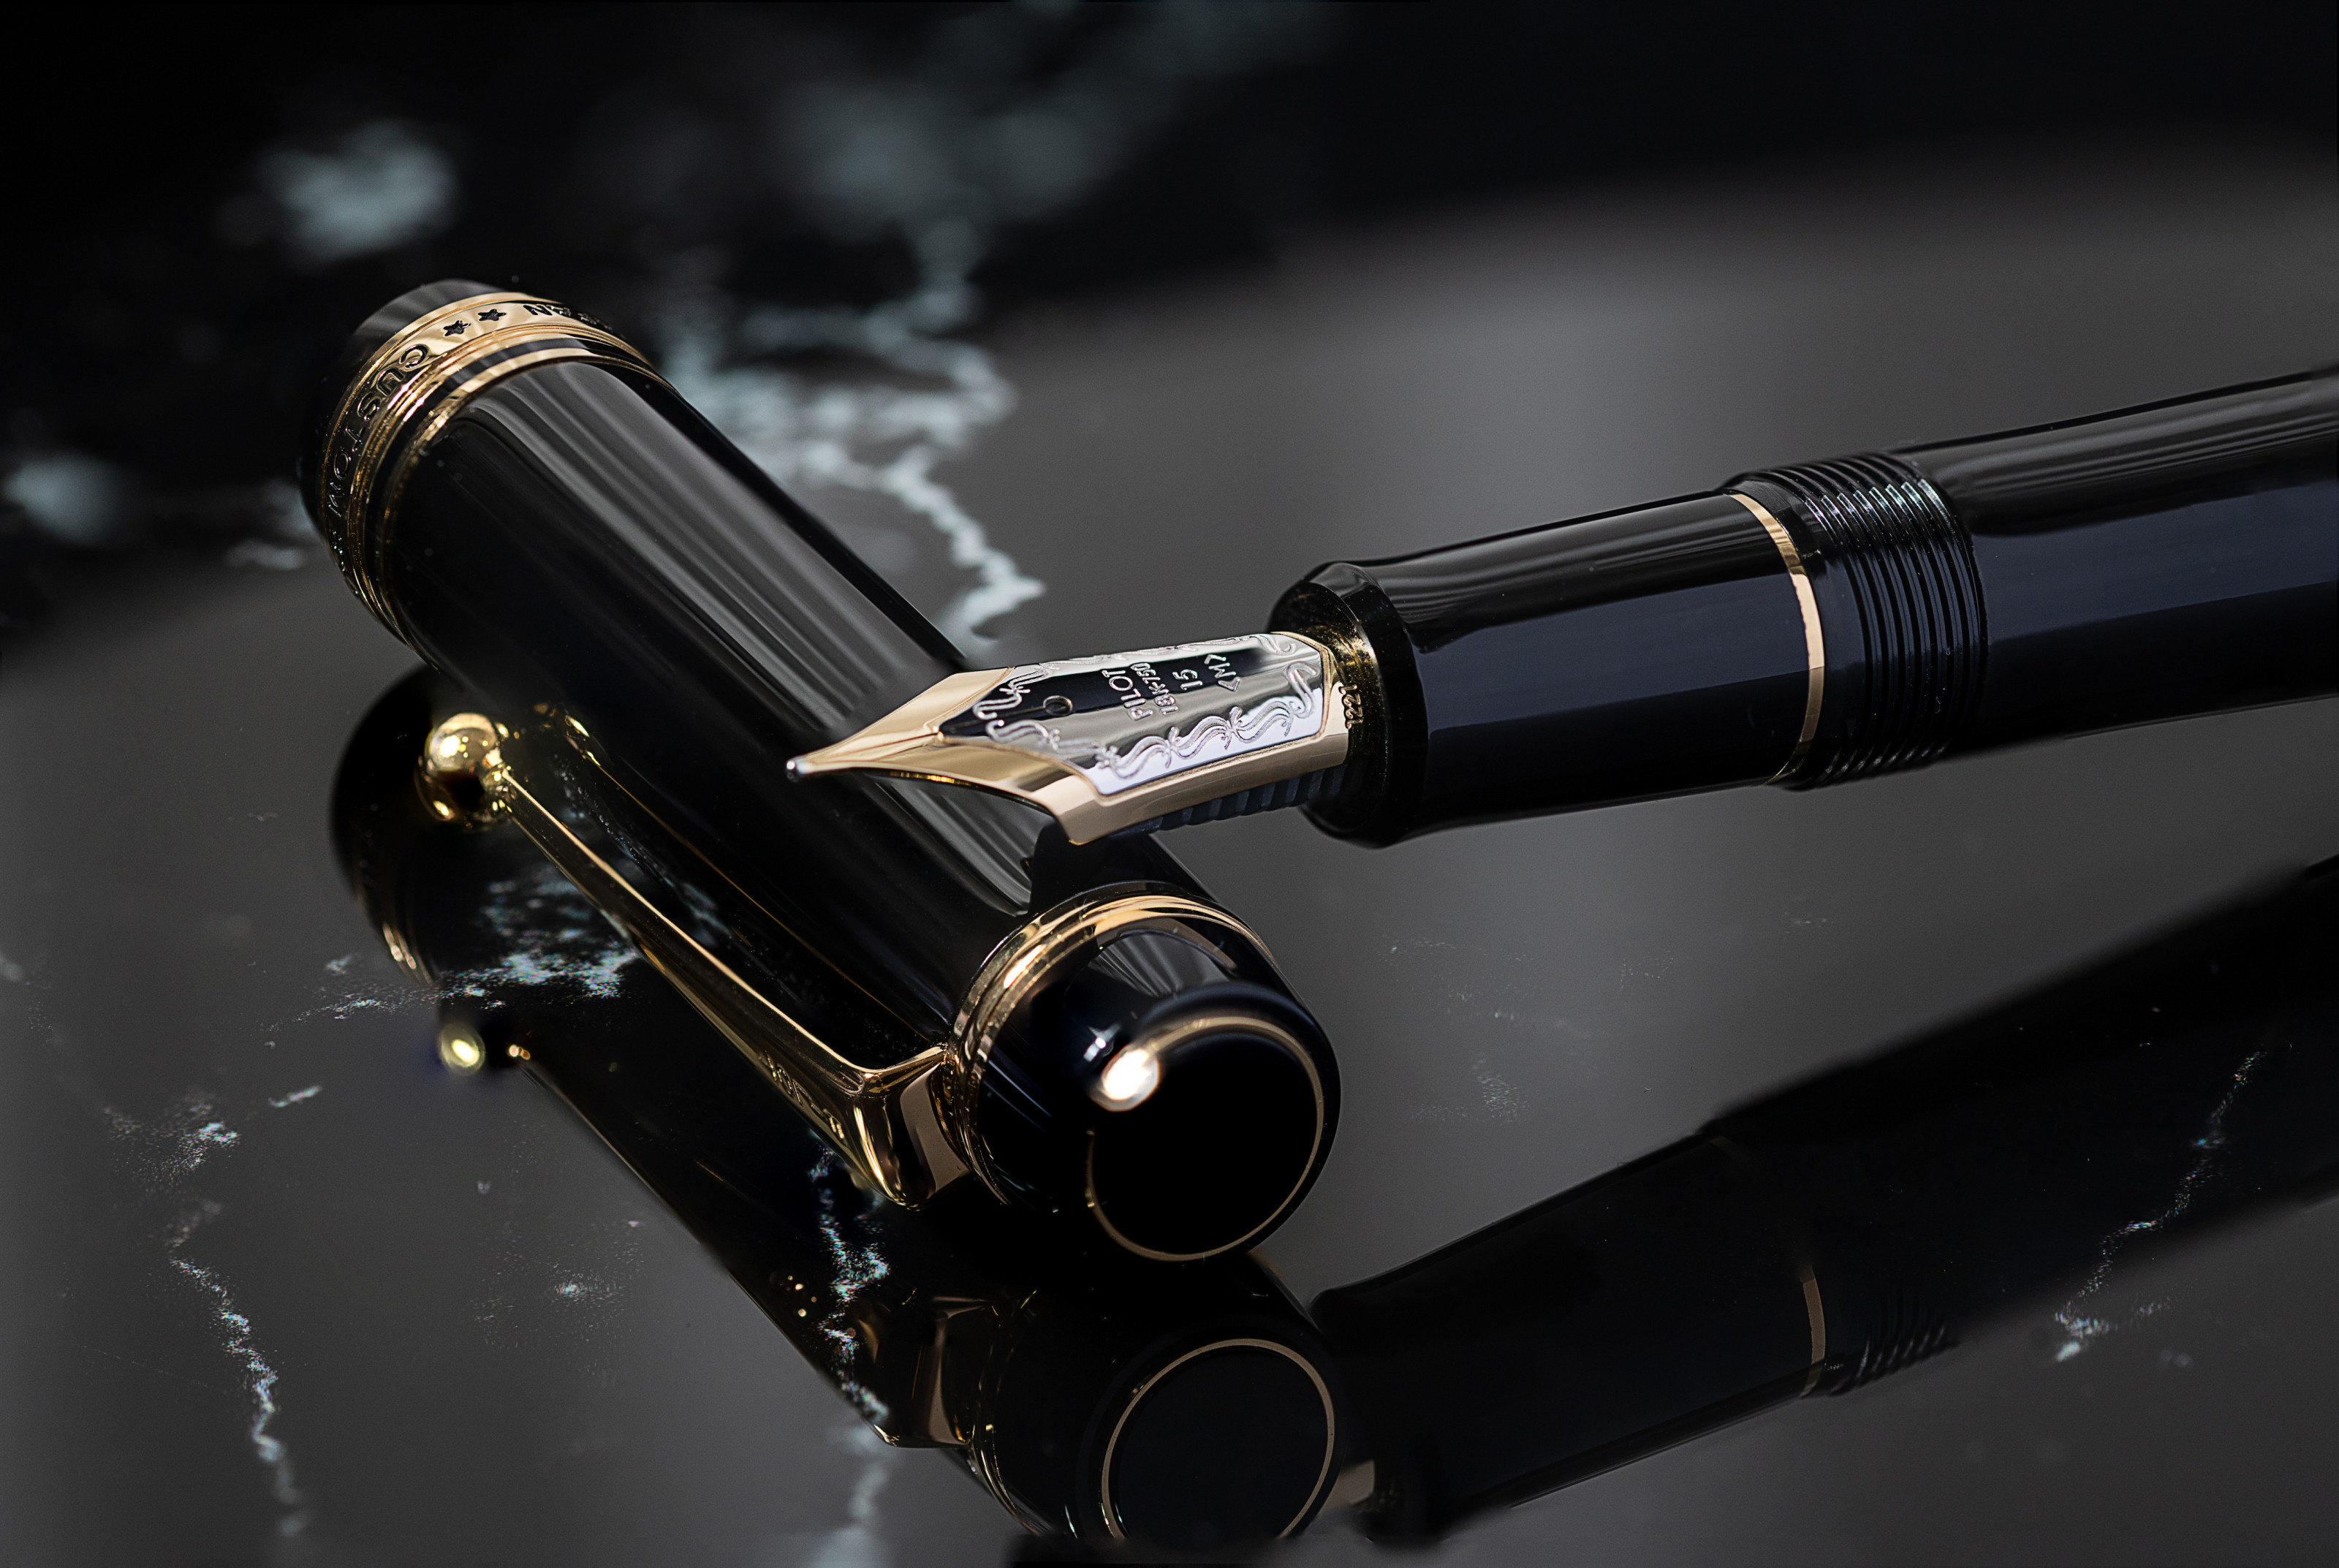 A close-up image of the Pilot CUSTOM 845 fountain pen, showcasing the glossy depth of the urushi lacquer on the barrel and cap. Engraved swirls and Pilot branding adorn the gold nib and trim, highlighting the value, craftmanship and prestige of a fountain pen